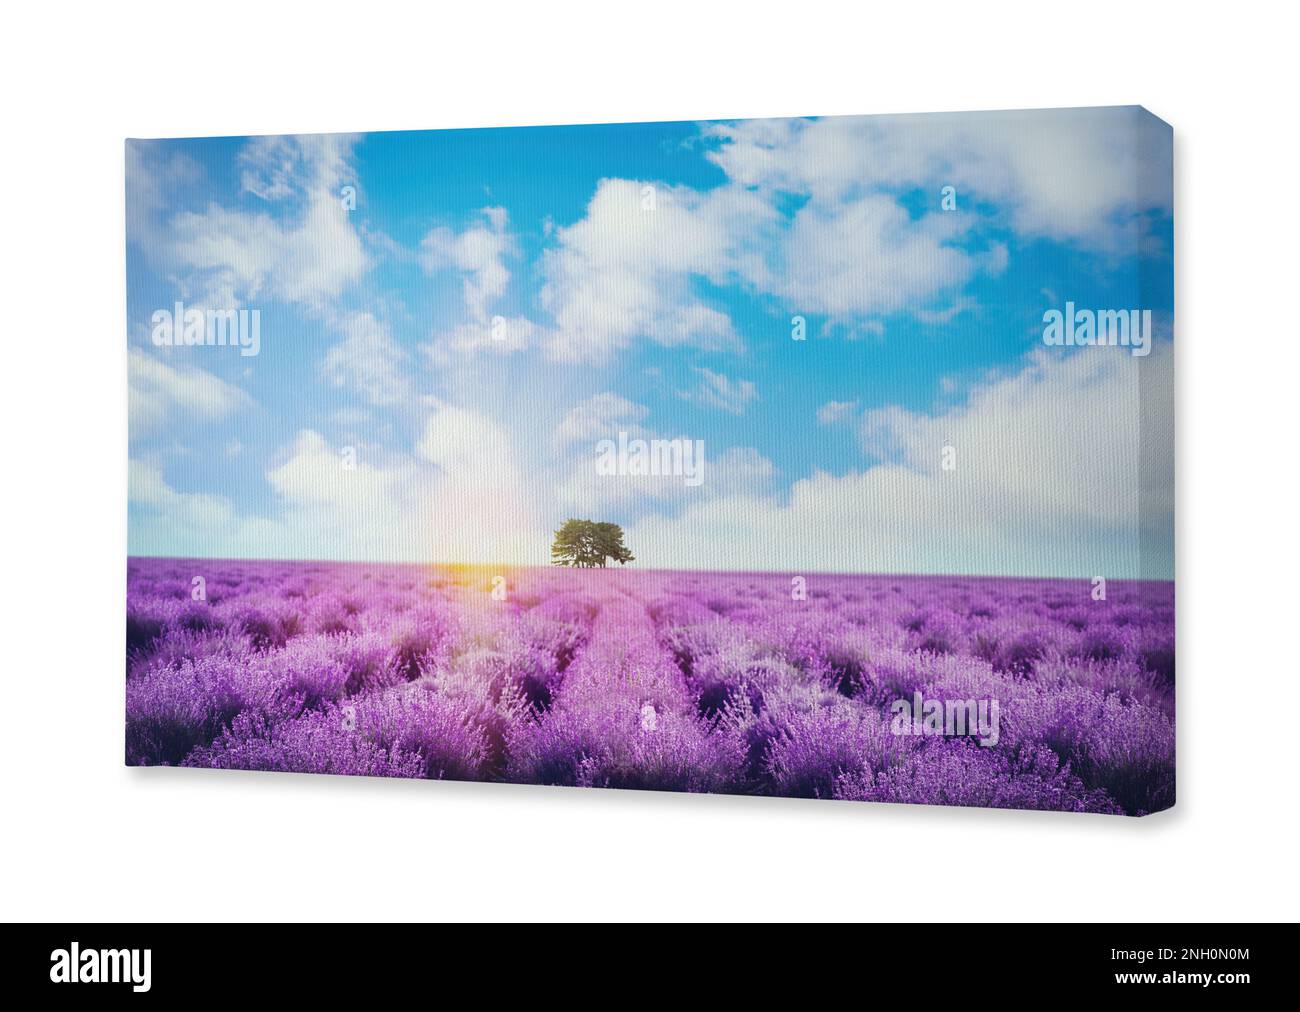 Photo printed on canvas, white background. Beautiful lavender field with single tree under amazing sky at sunrise Stock Photo